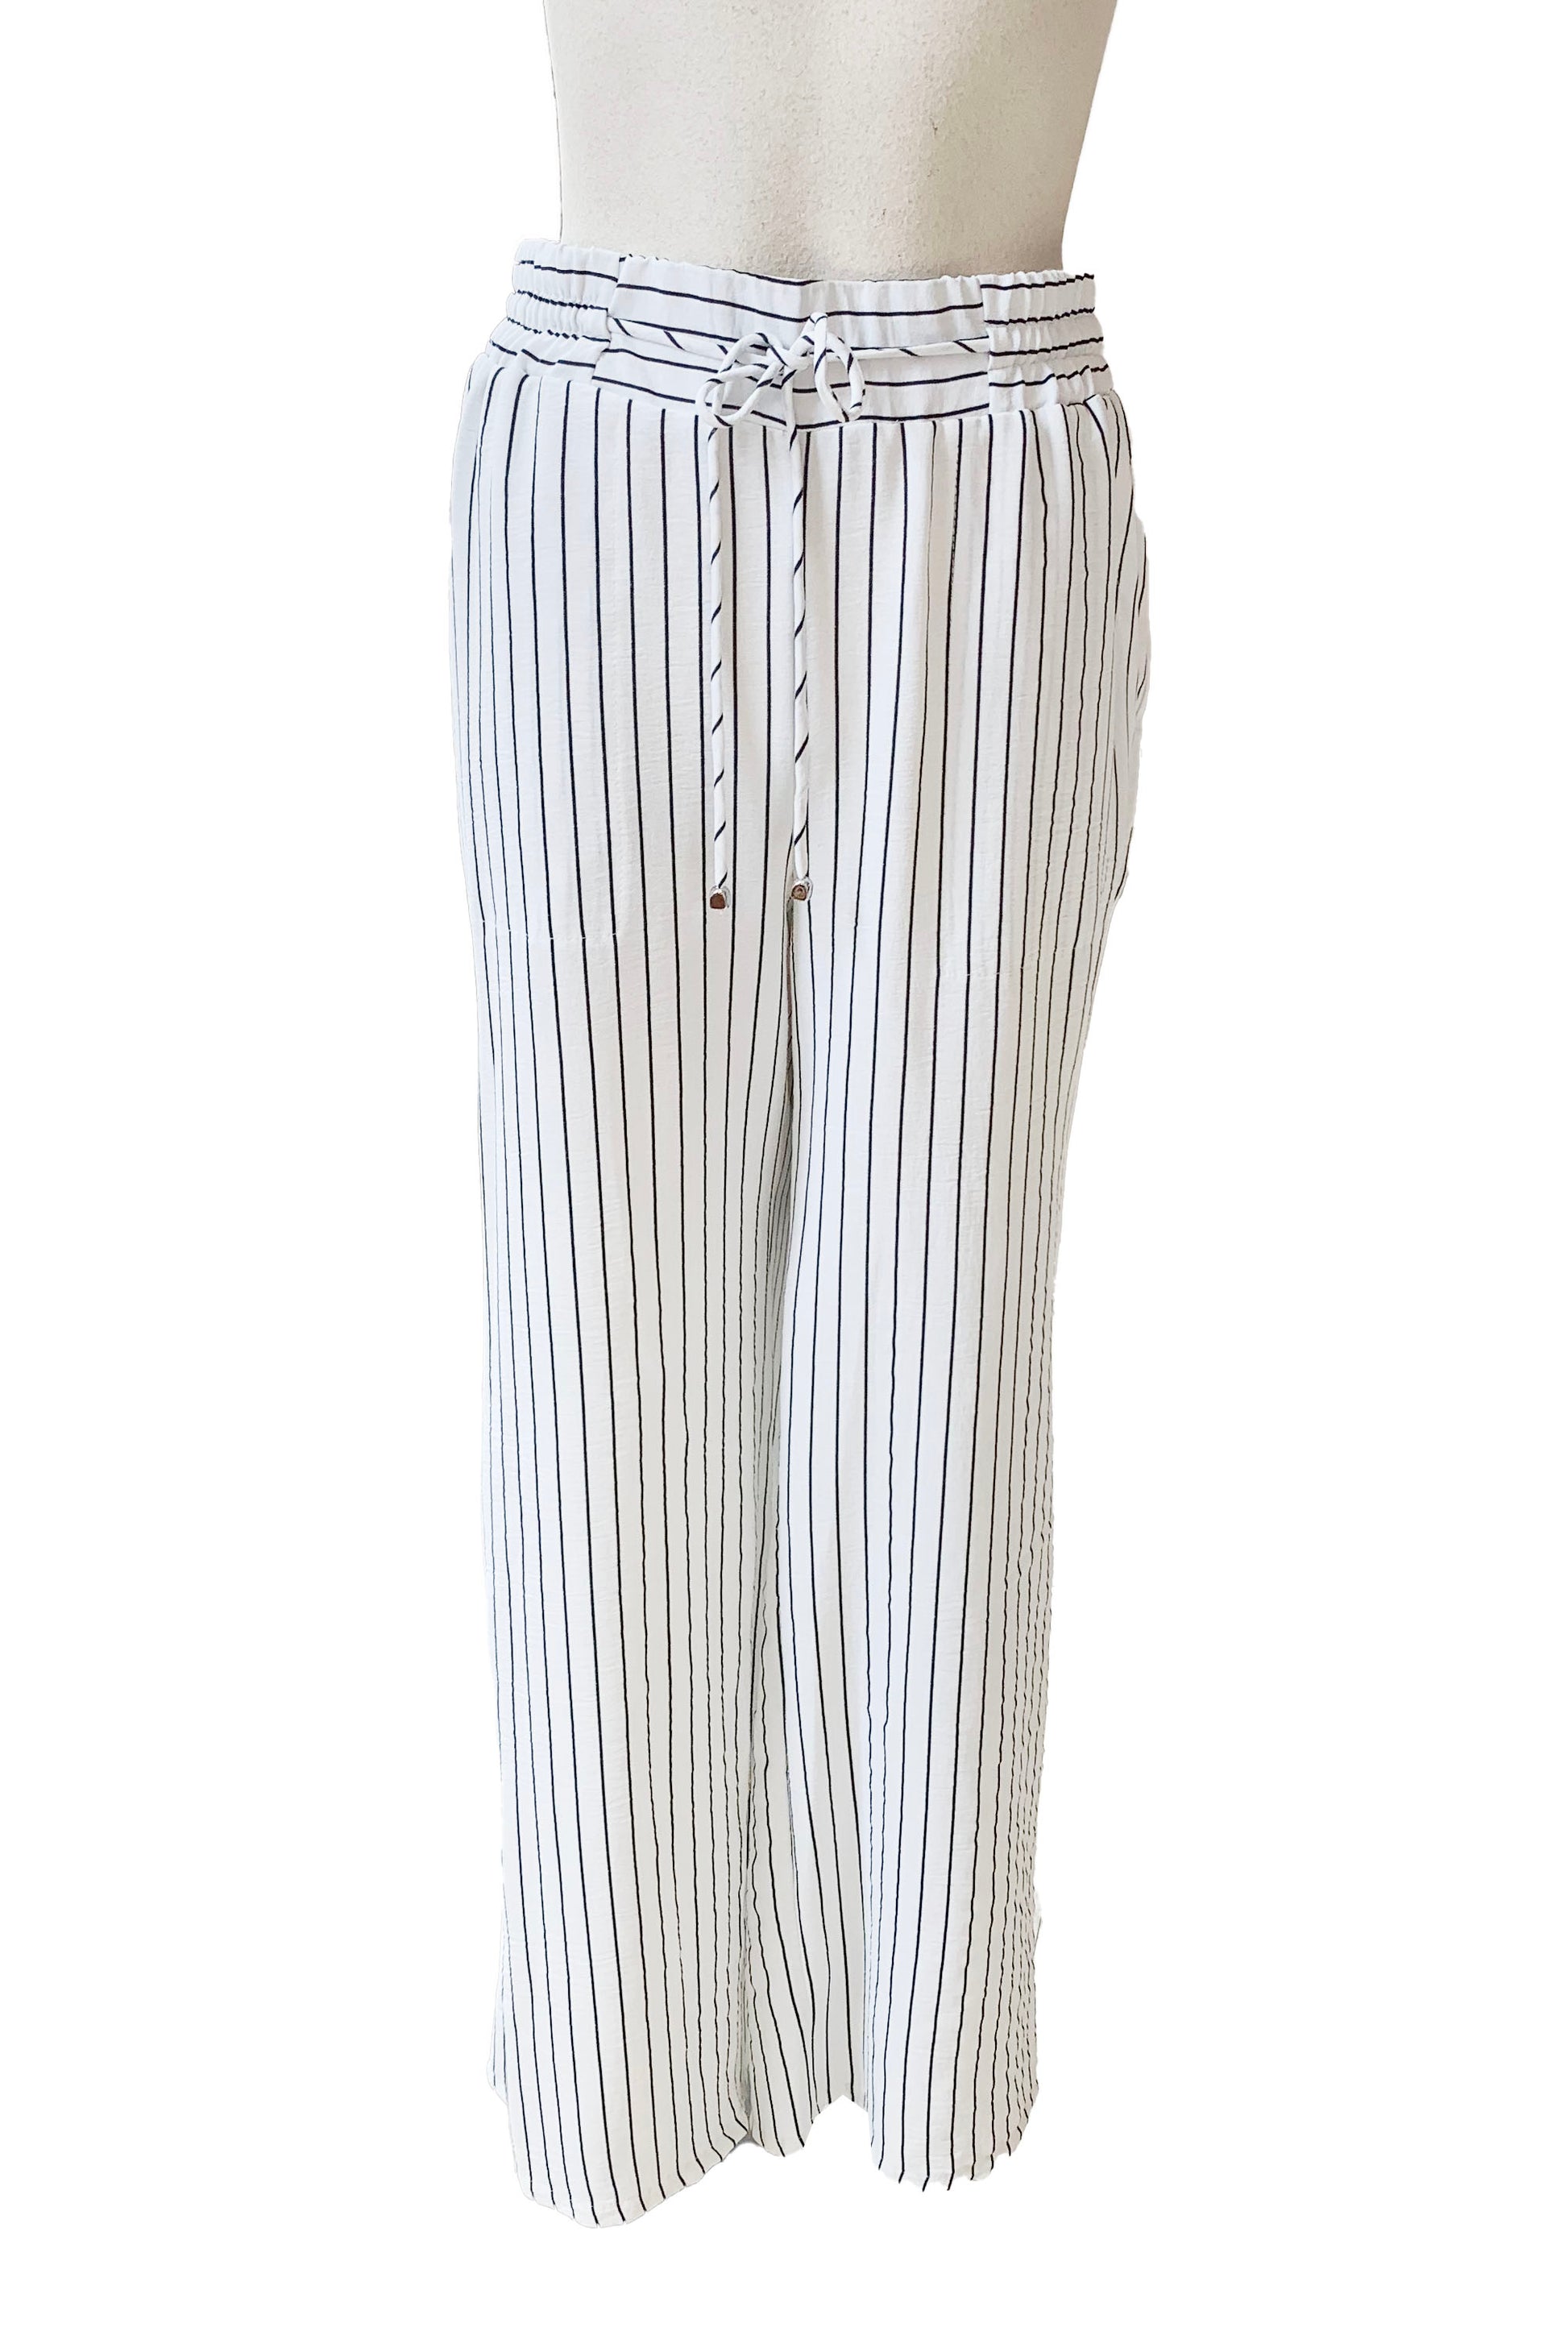 The Concordia Pant by Pure Essence in Ivory Pinstripe is shown on a mannequin in front of a white background